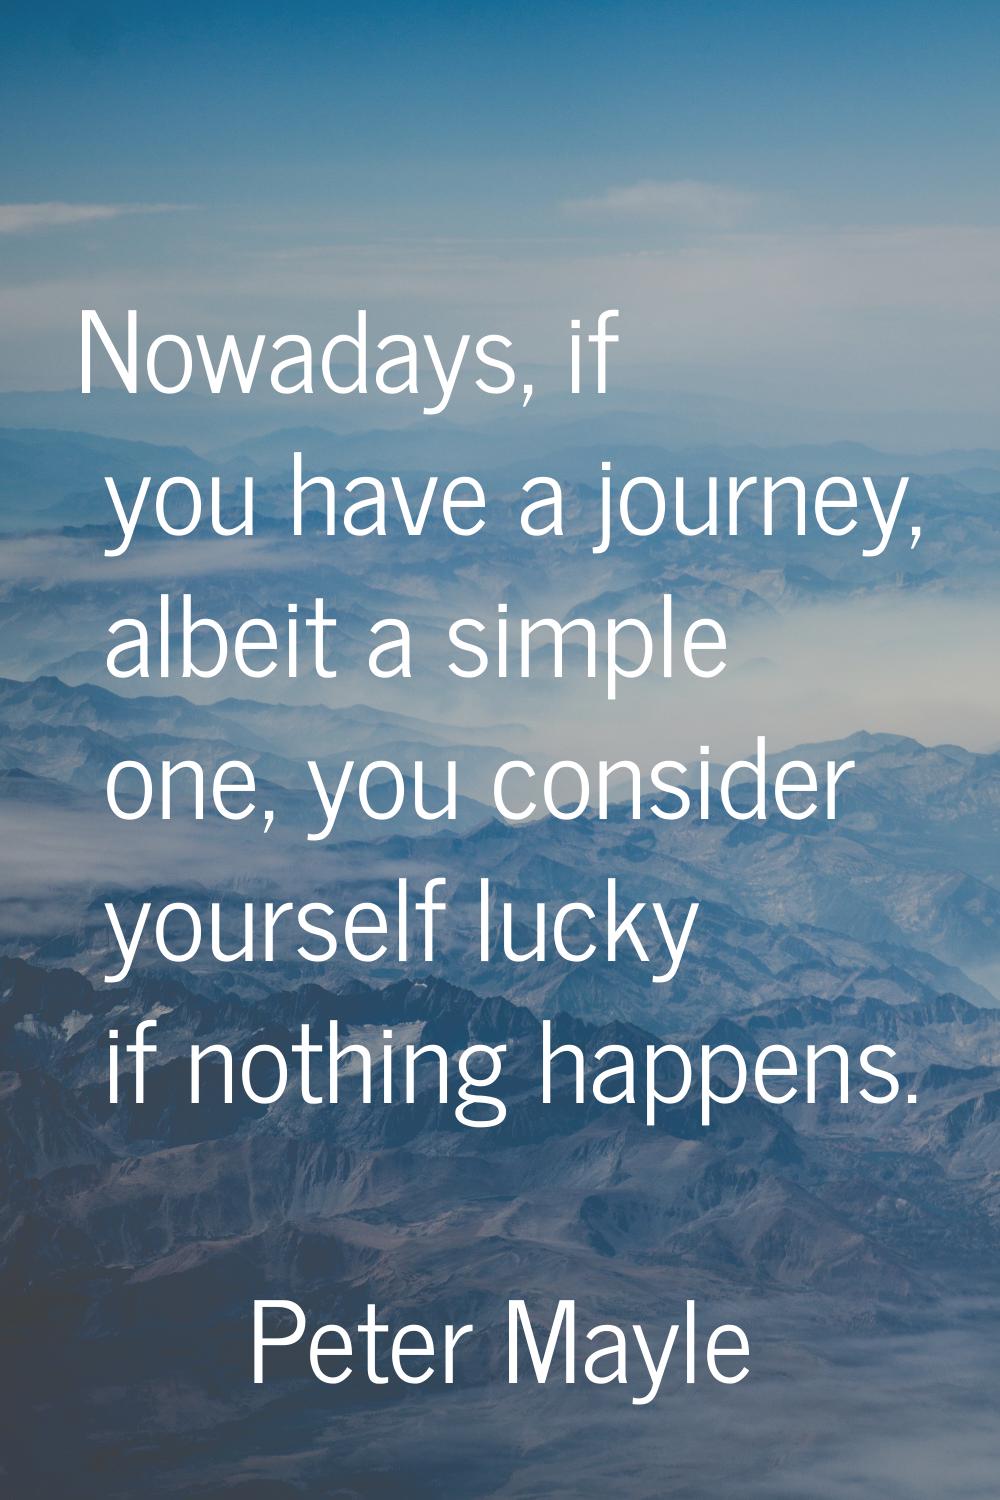 Nowadays, if you have a journey, albeit a simple one, you consider yourself lucky if nothing happen